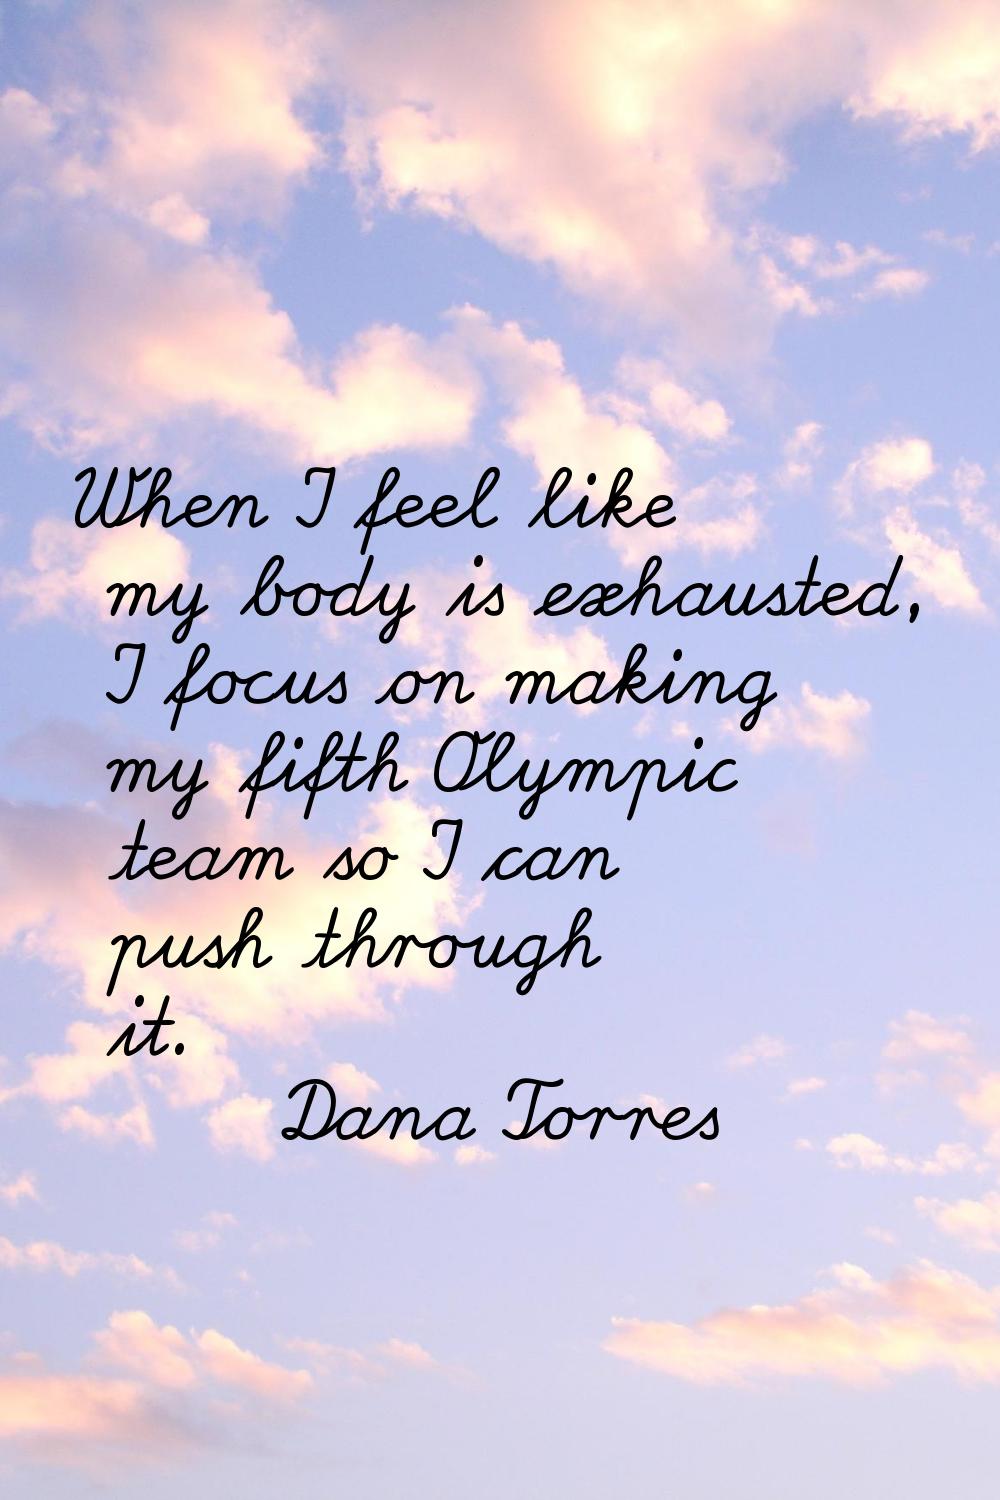 When I feel like my body is exhausted, I focus on making my fifth Olympic team so I can push throug